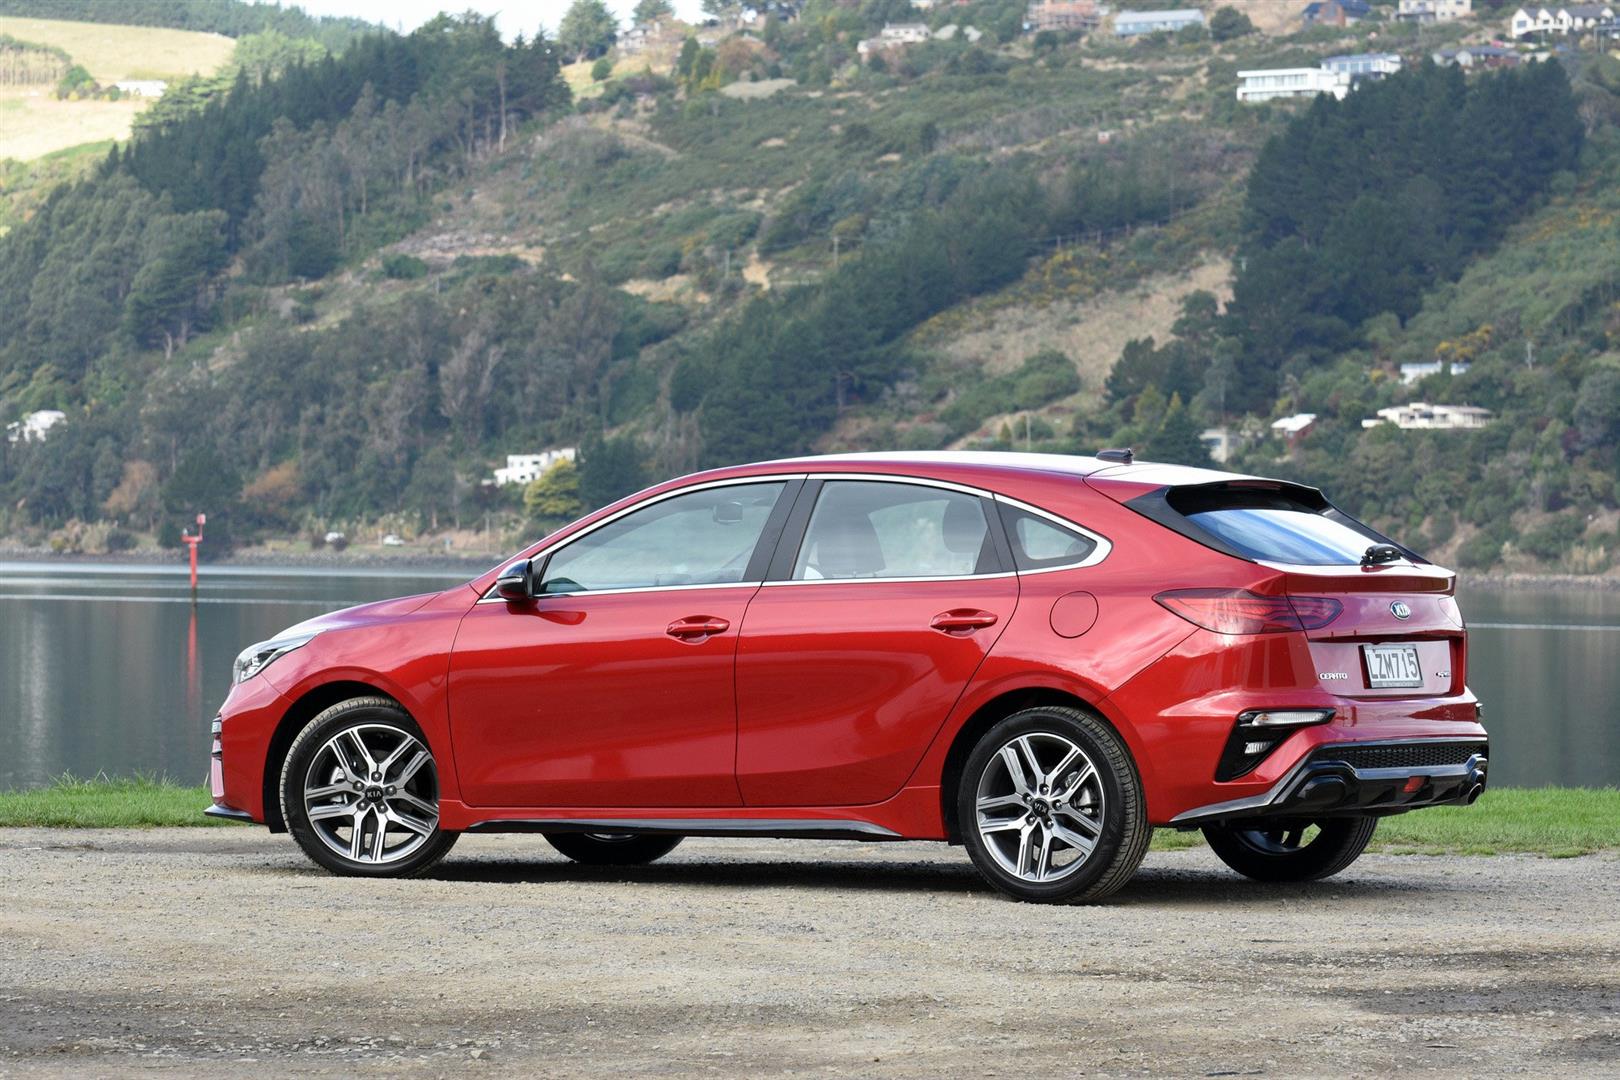 Article: New Cerato is a step up